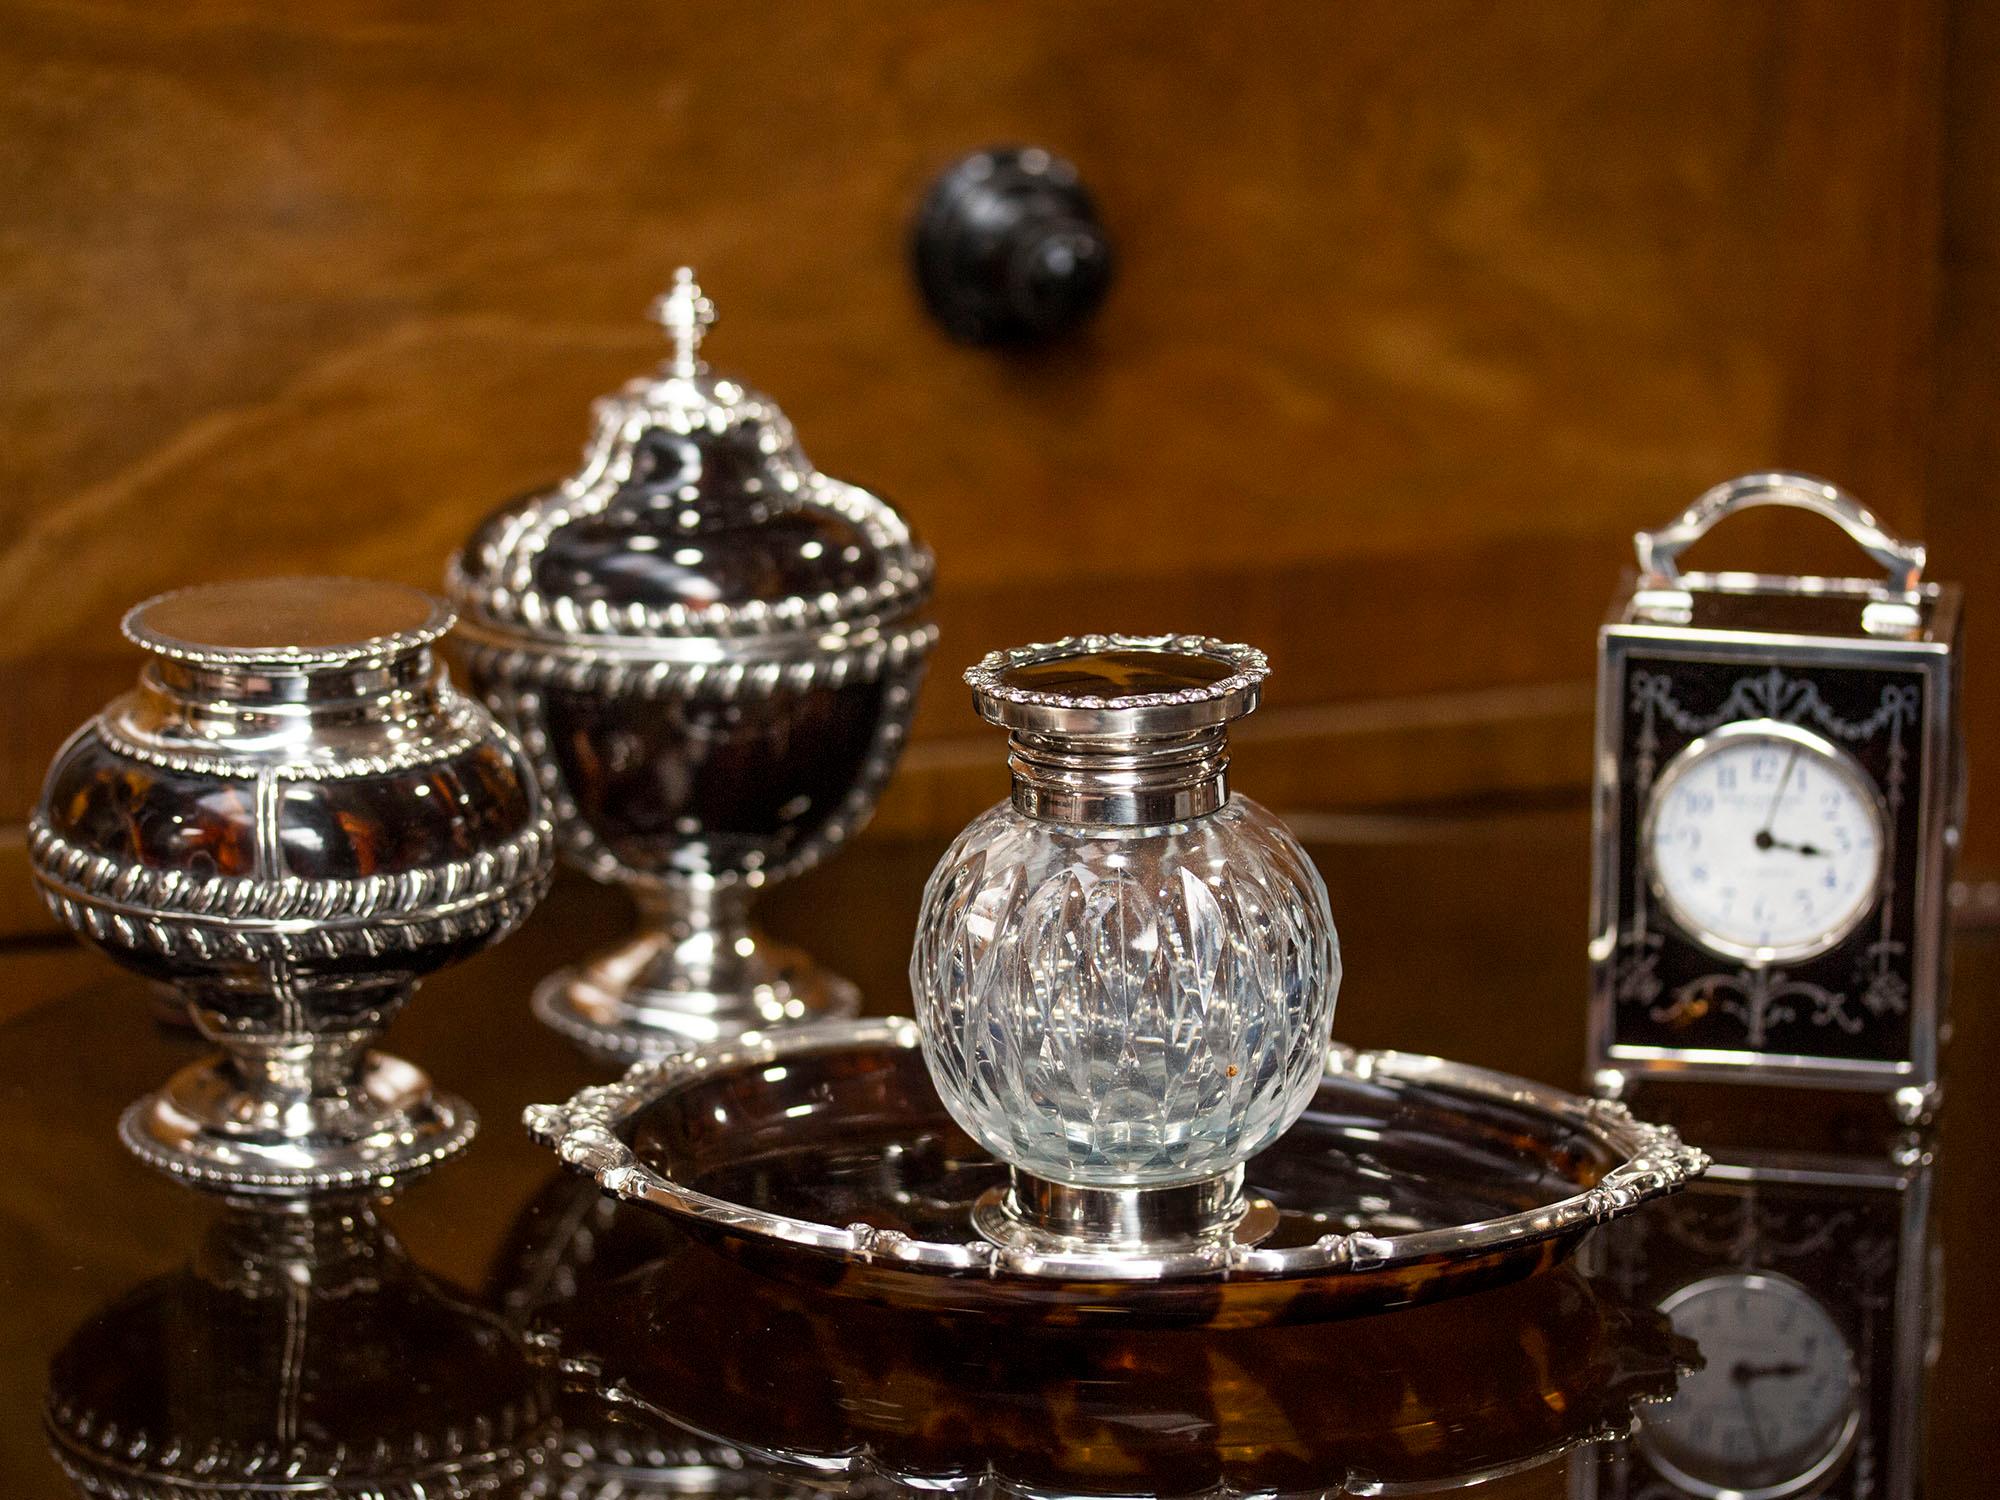 Grey & Co Silver 

From our Accessories collection, we are pleased to offer this Antique English Silver & Tortoiseshell Inkwell. The Inkwell of globular shape with a quilt cut glass body mounted with a circular silver and tortoiseshell lid. The